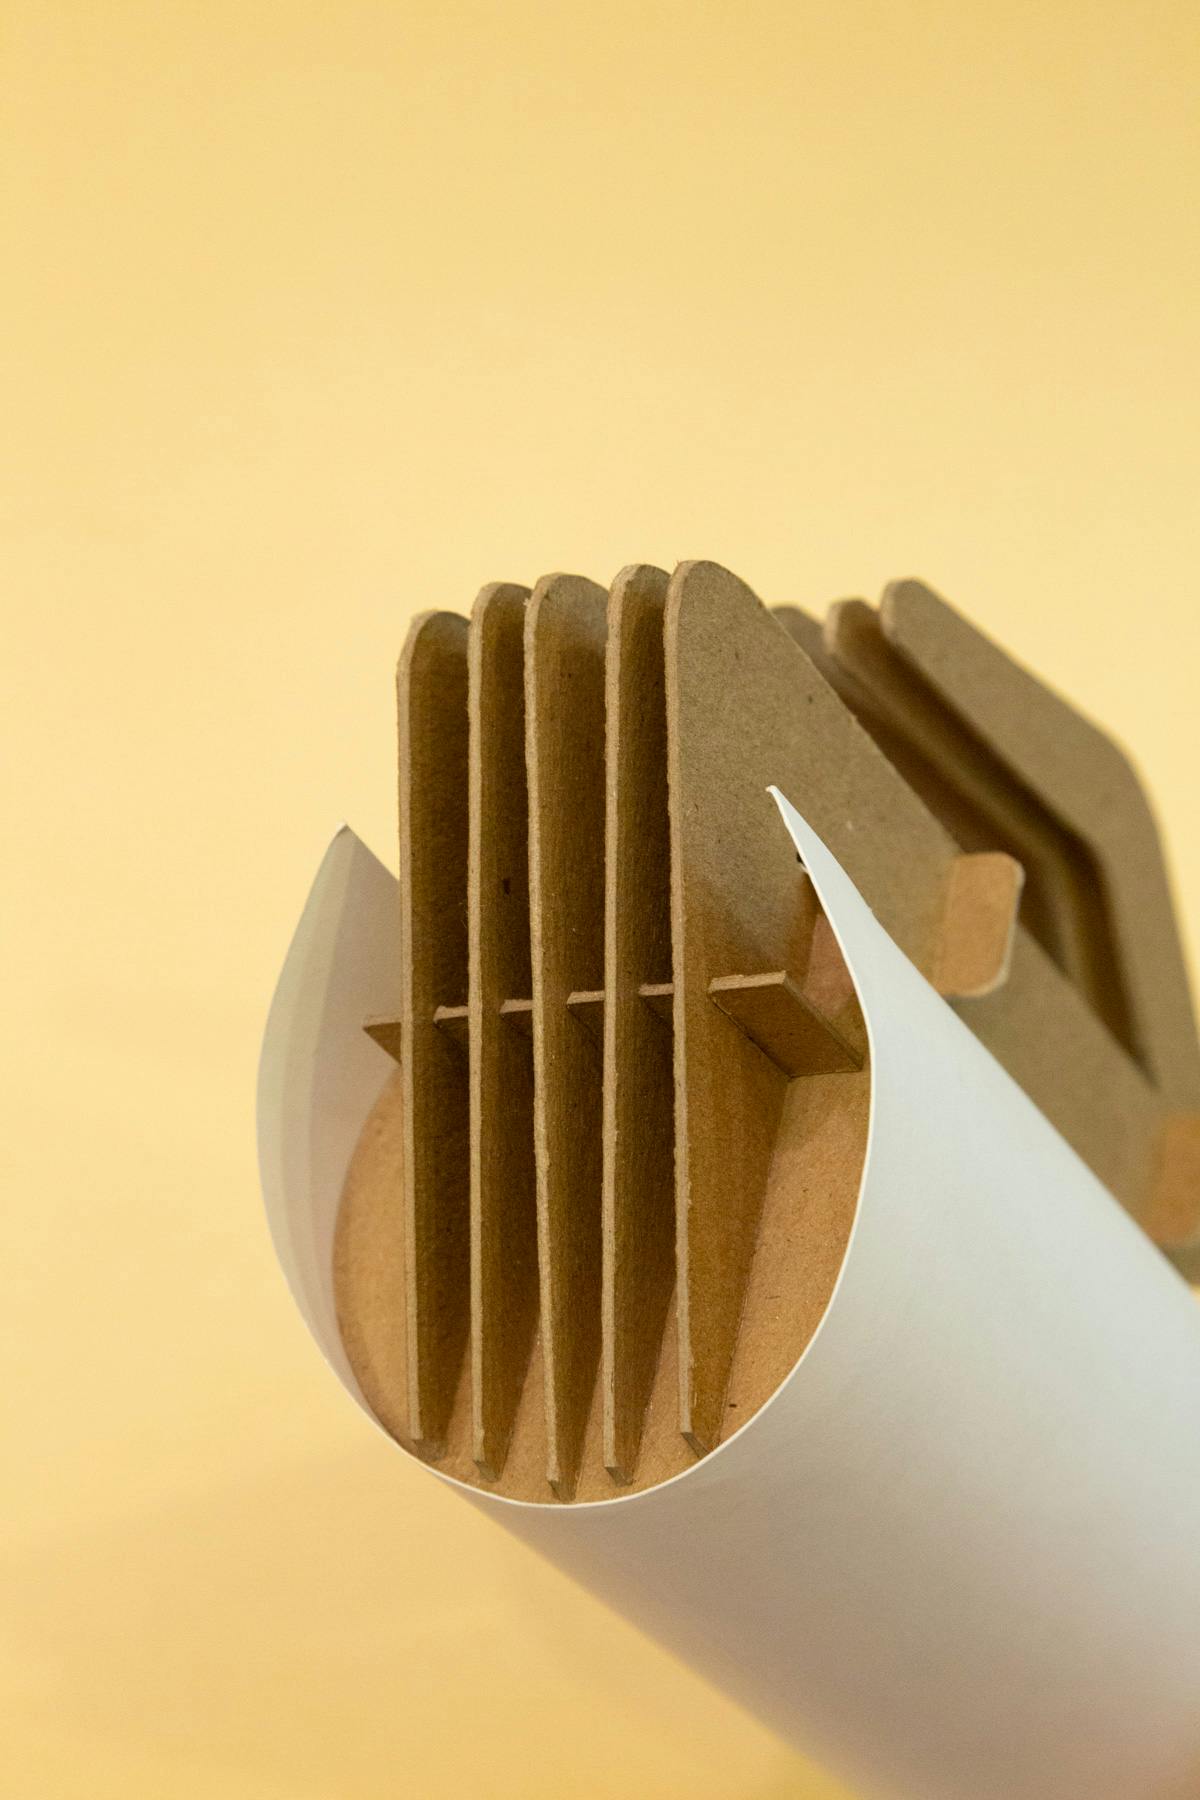 Close-up of the bottom of the model. The chipboard pieces of the handle form a repetitive pattern that looks like a heatsink.